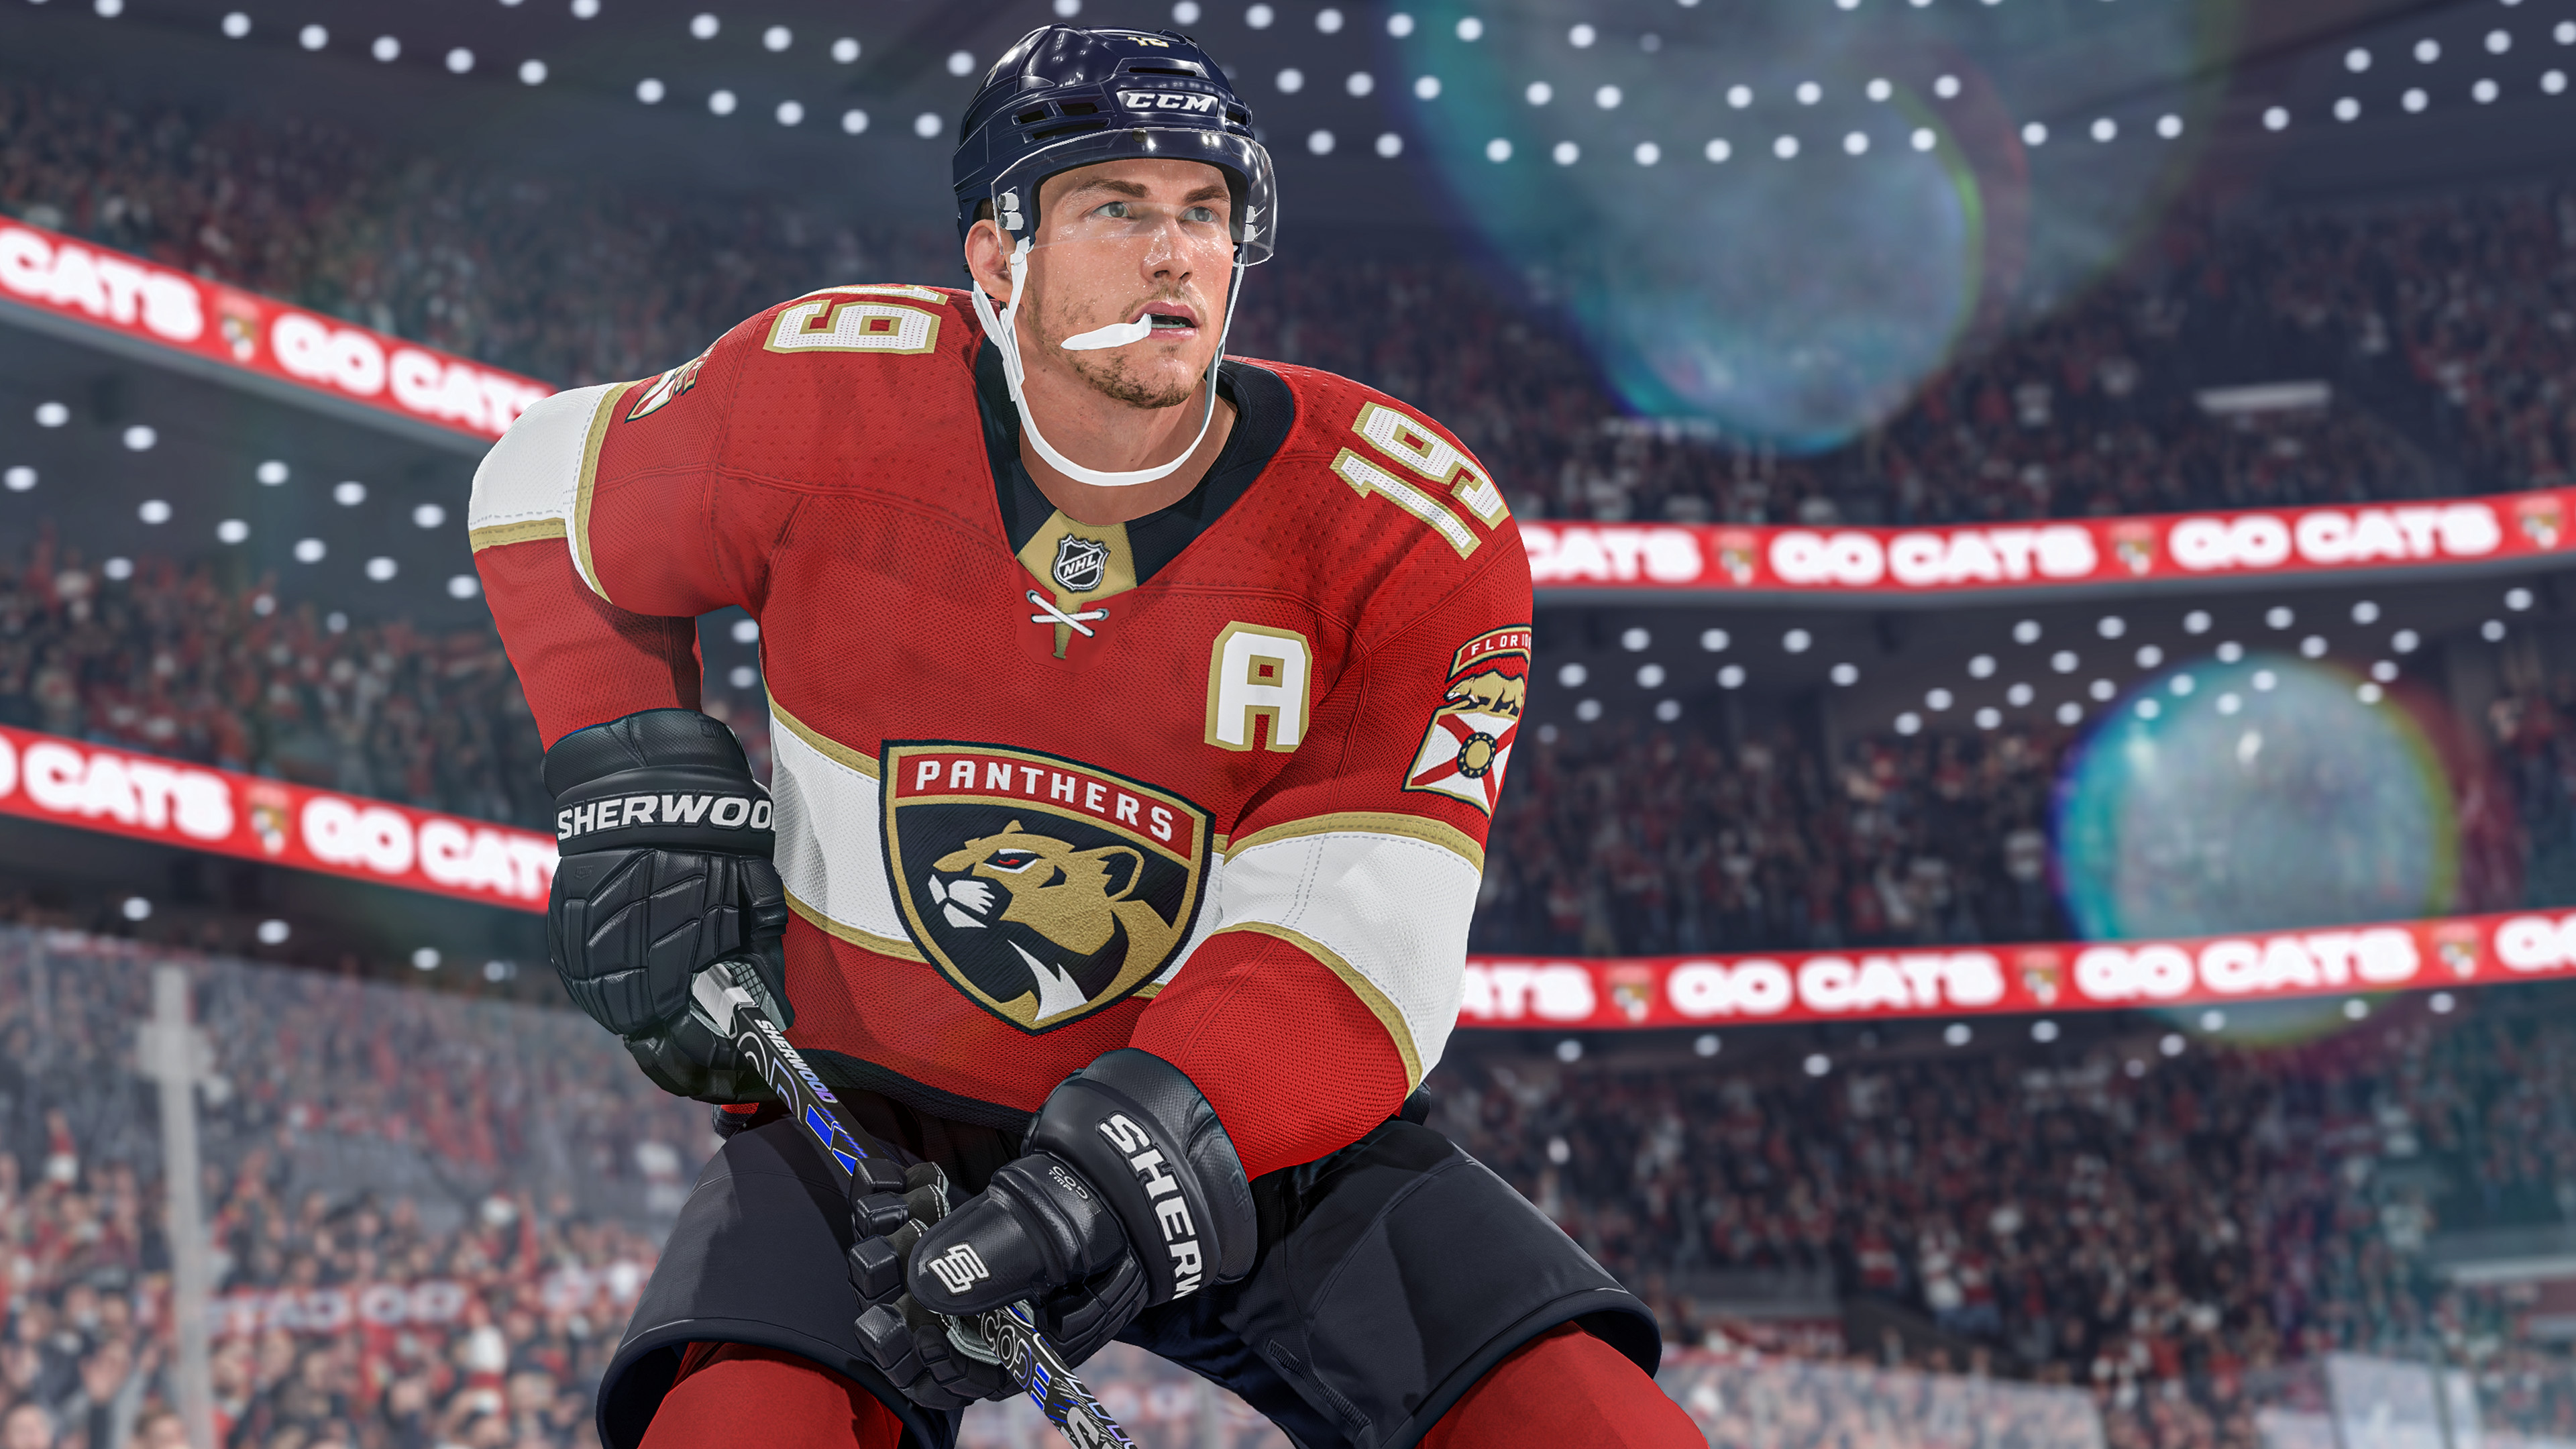 Image Of Hockey Players In An Arena Game Background, Nhl Pictures